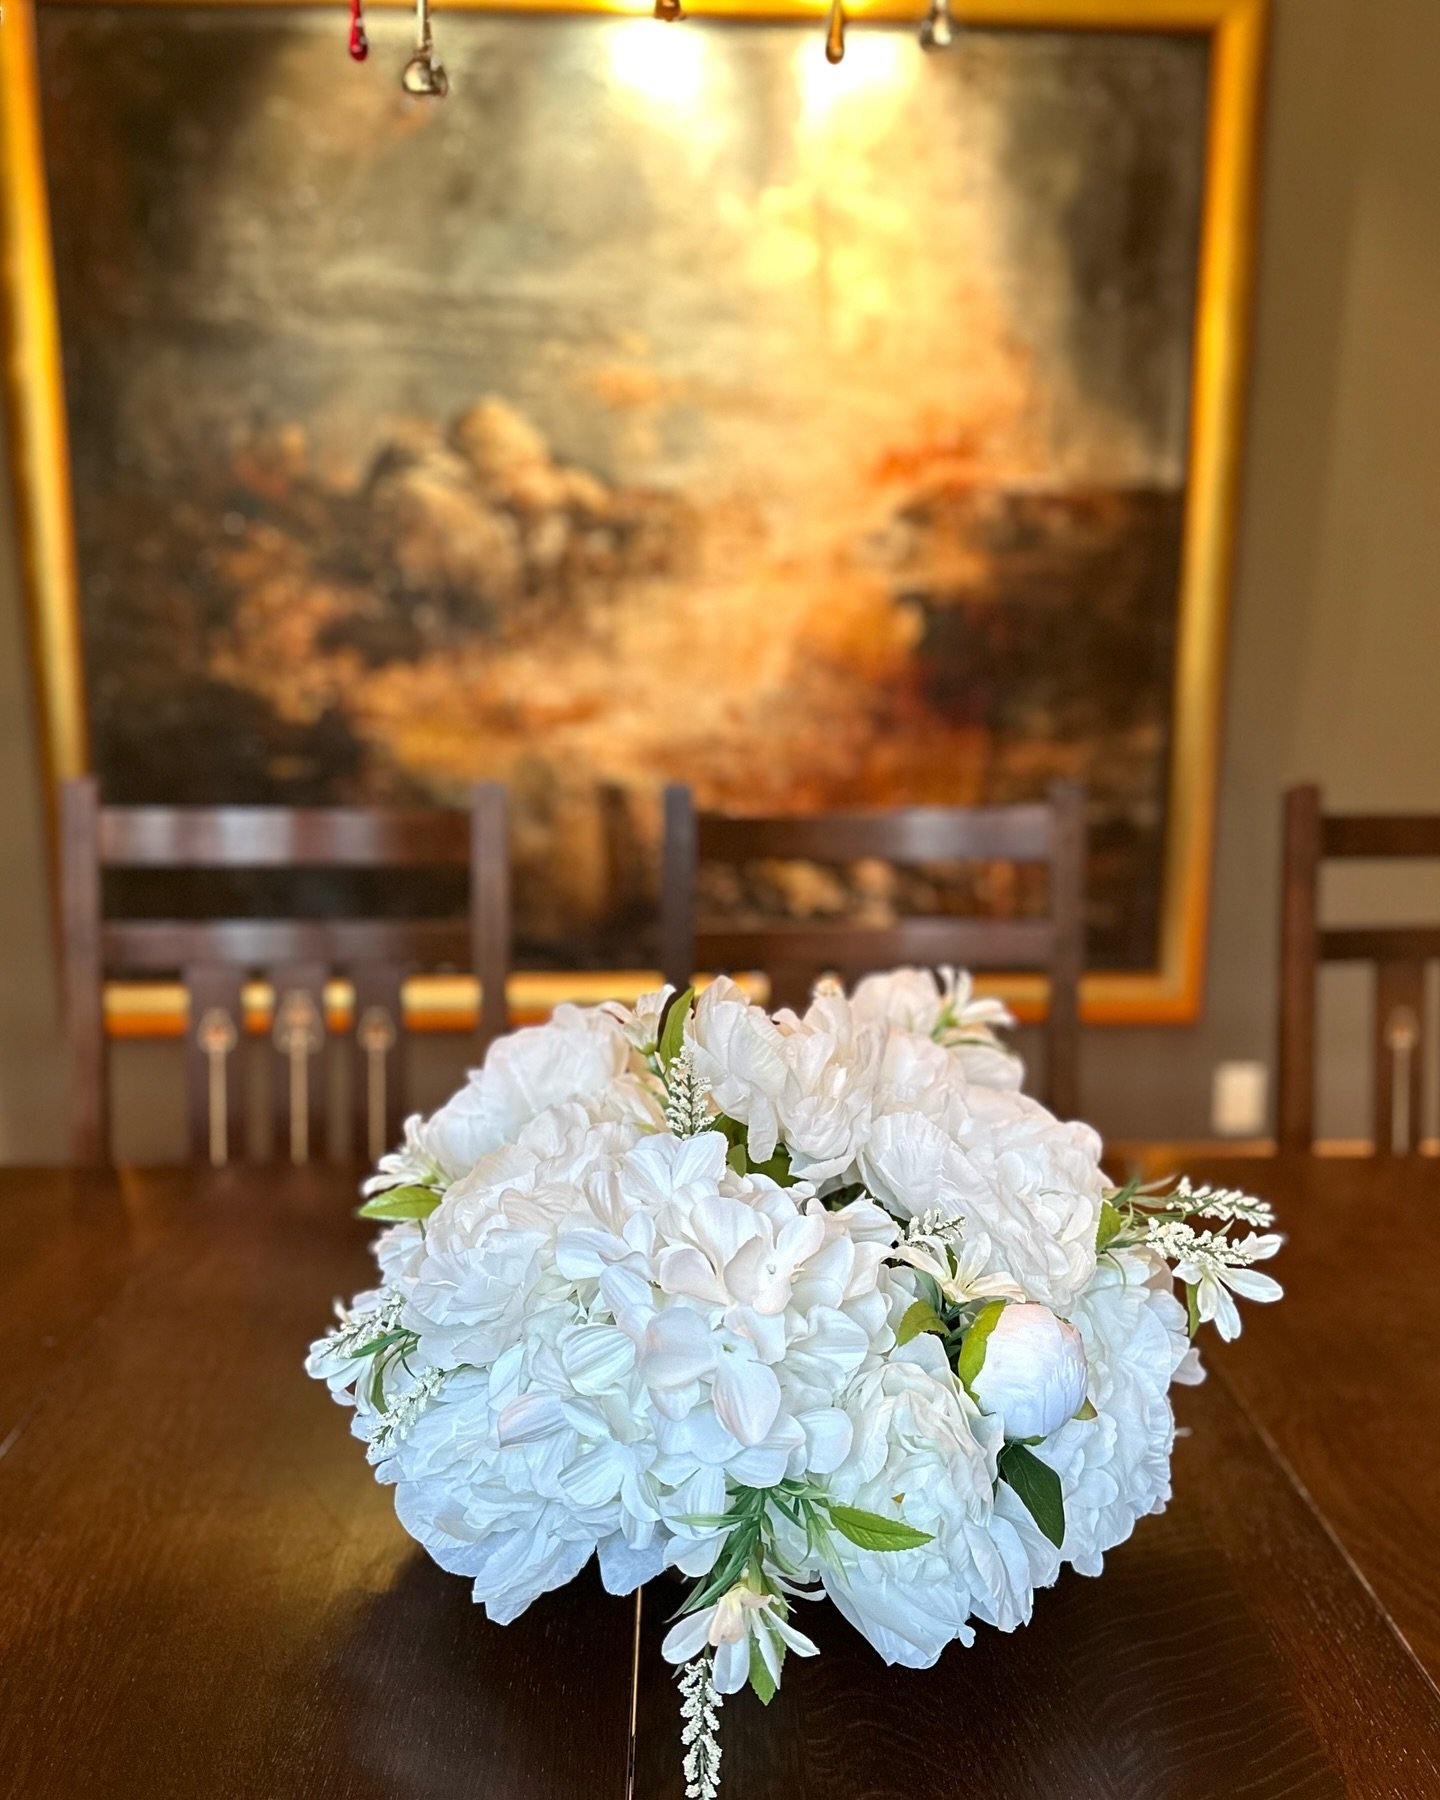 Added some light to a dramatic formal dining in Church Ranches yesterday.

Loved the oversized art in this room. It really set the tone.

Stay tuned for this luxury listing coming up @yycagent

#flowers #formaldining #brightenitup #stagingexpert #sta